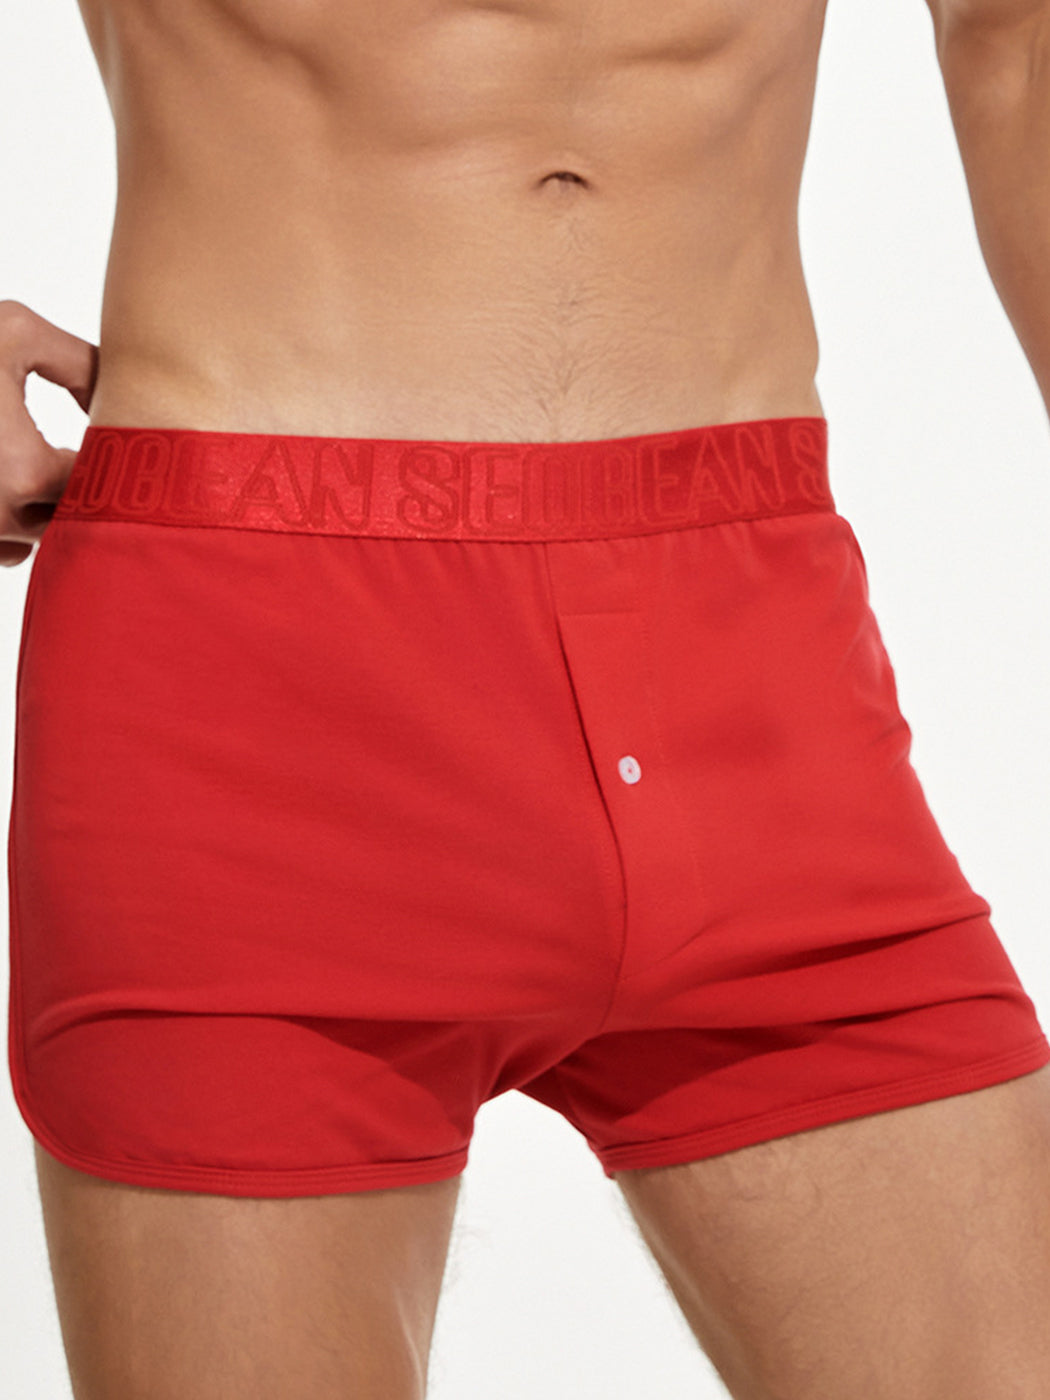 Men’s Knitted Boxers With Button Fly